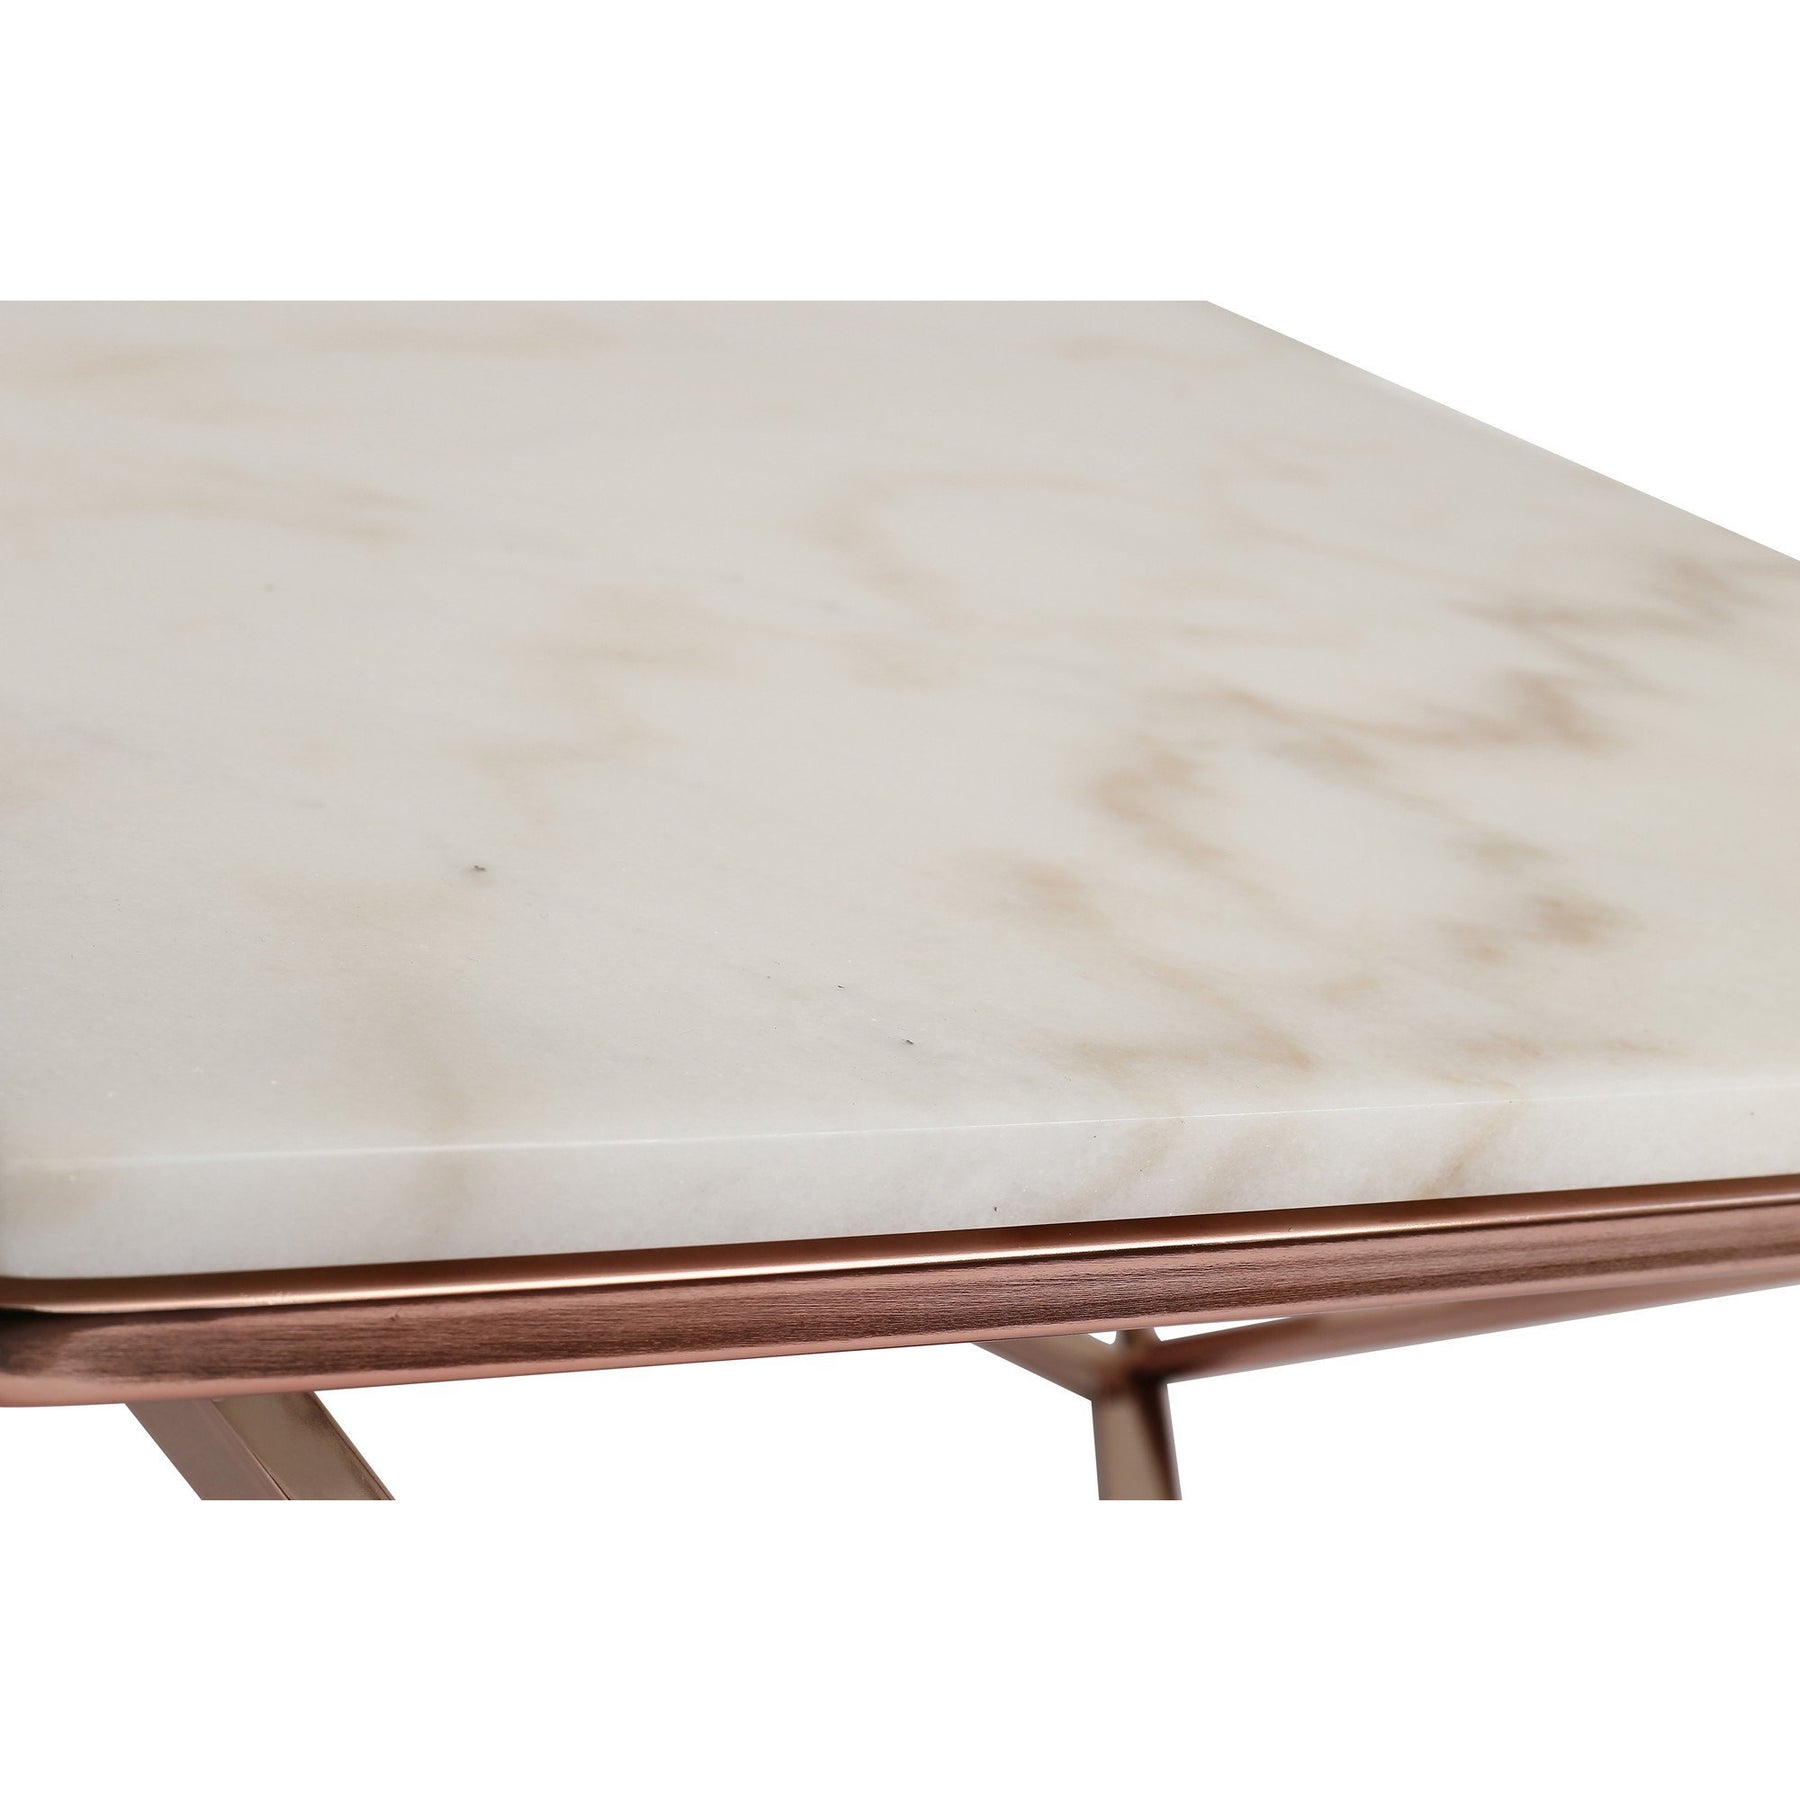 Edloe Finch Aria Rose Gold Coffee Table with White Marble Top